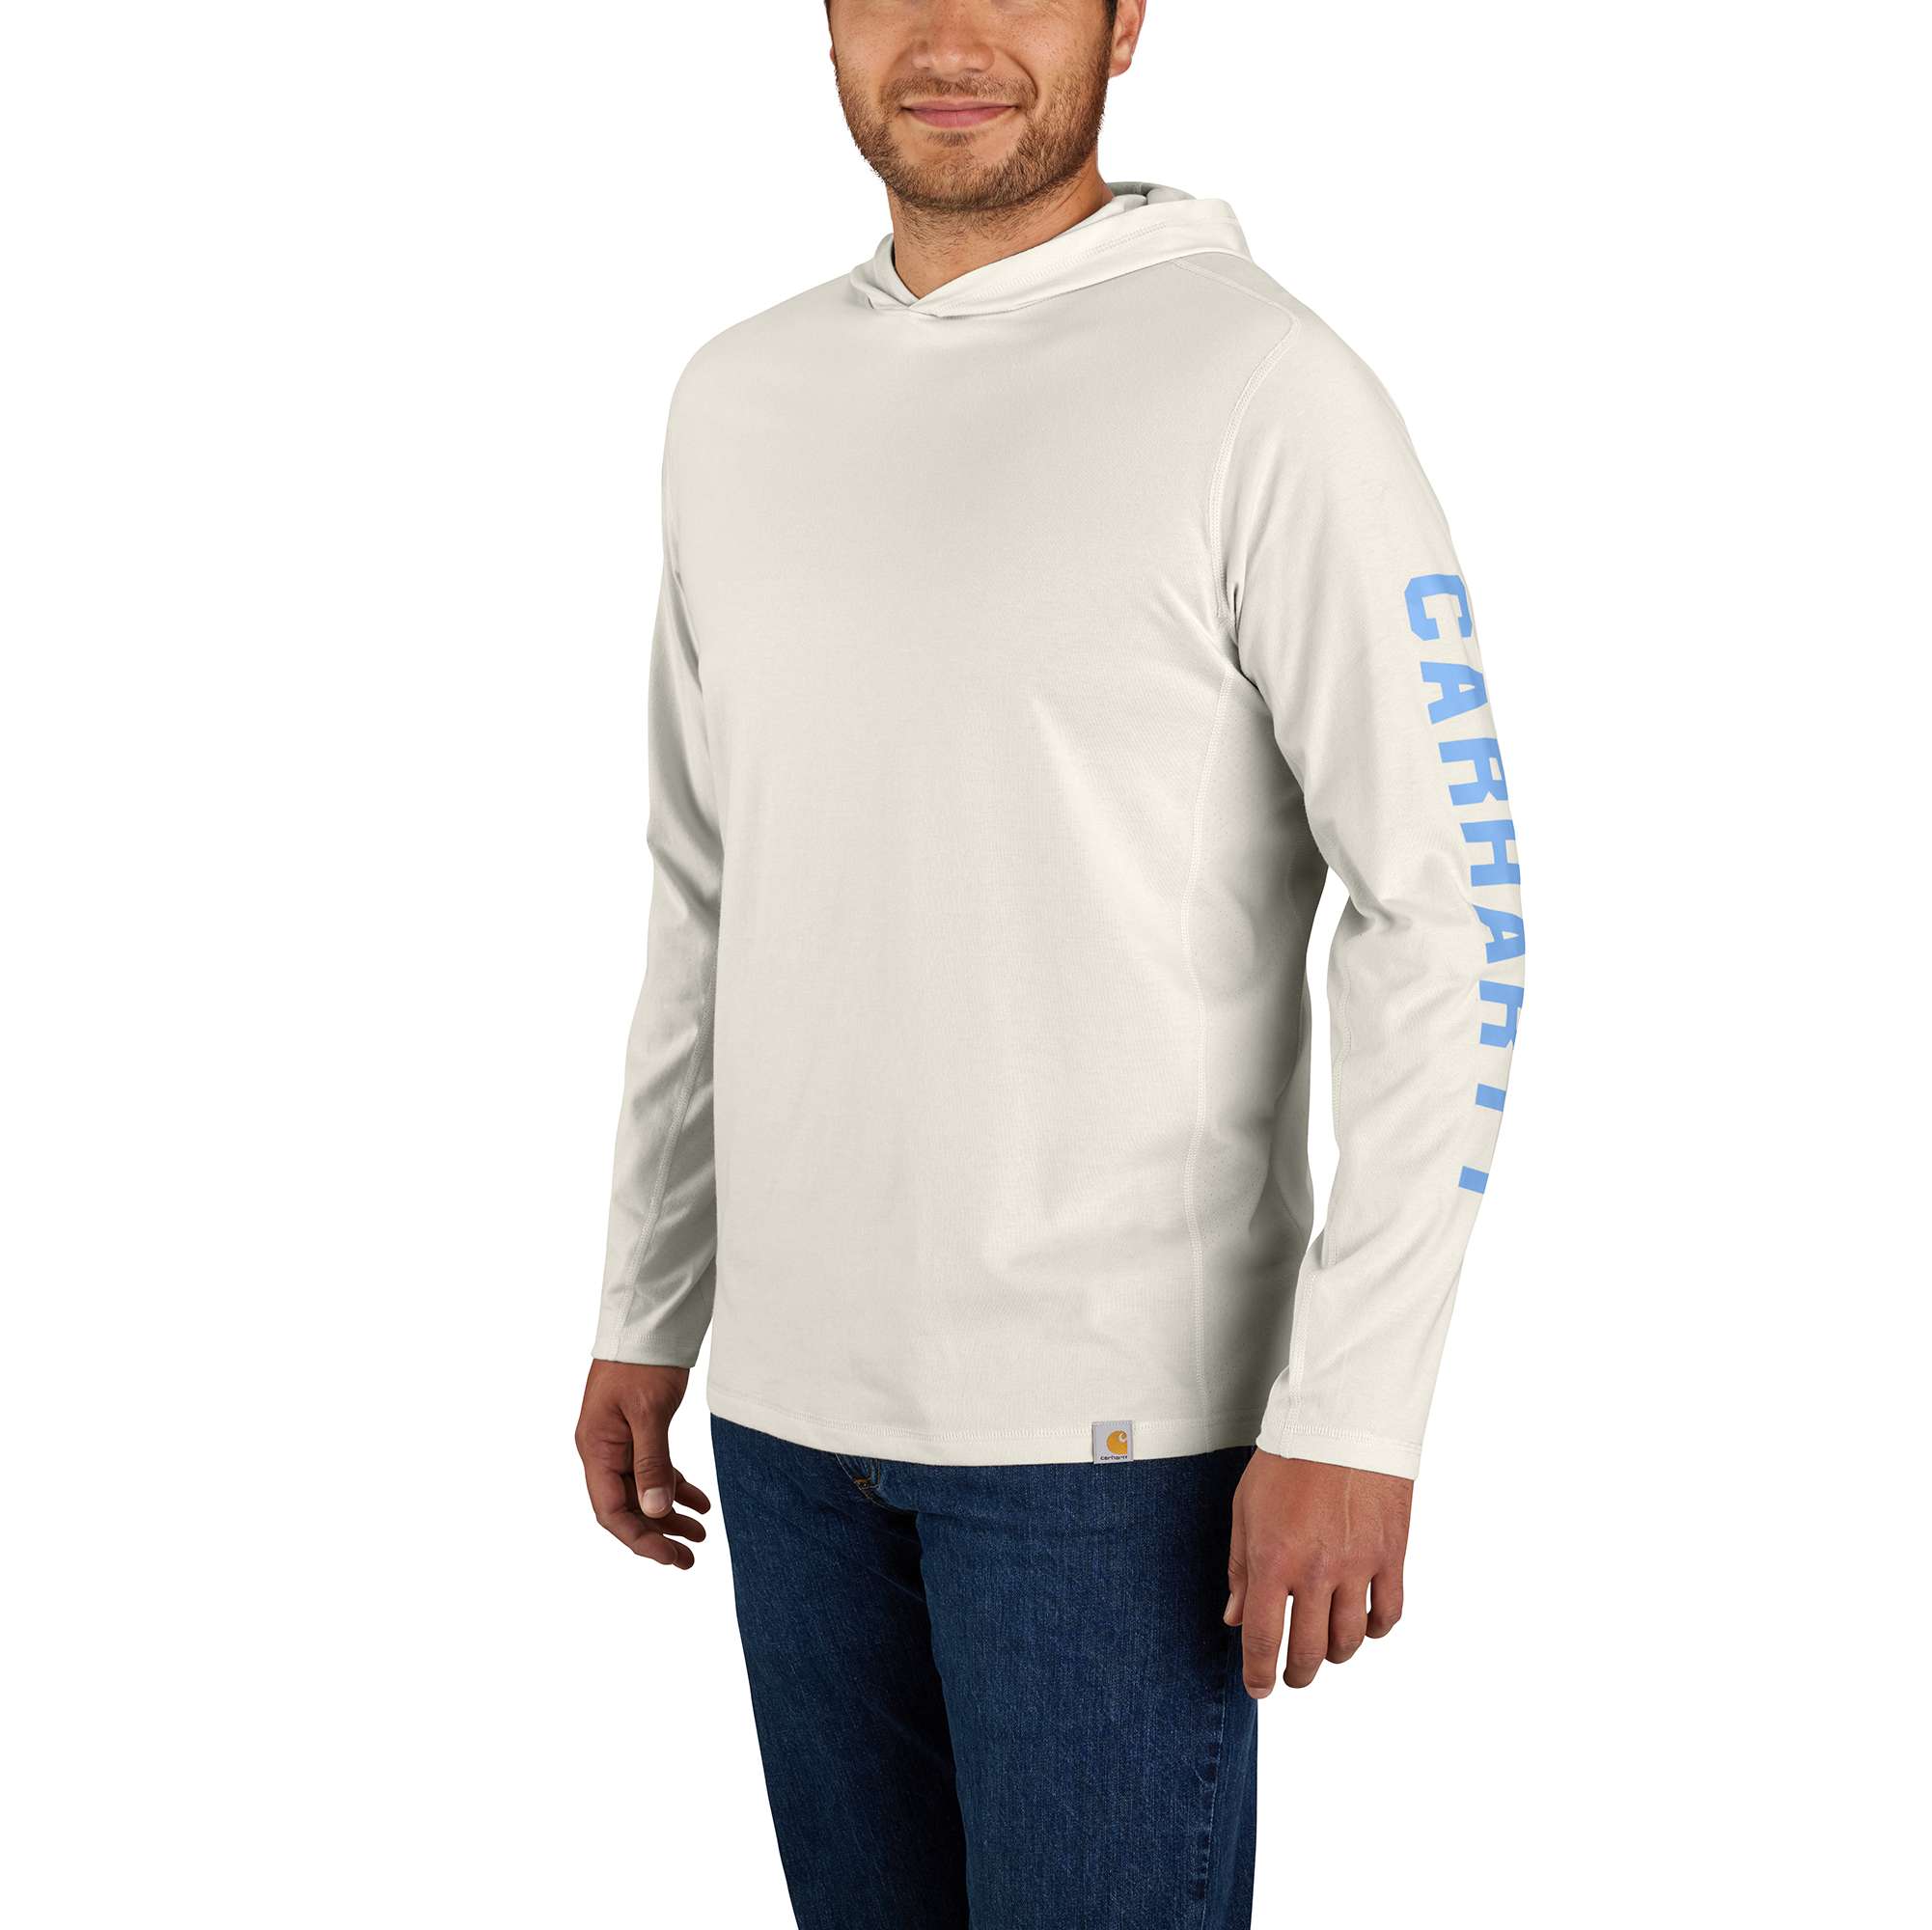 Carhartt Force Relaxed Fit Midweight Long-Sleeve Logo Graphic Hooded T-Shirt (2 Colors) $21 + Free Shipping